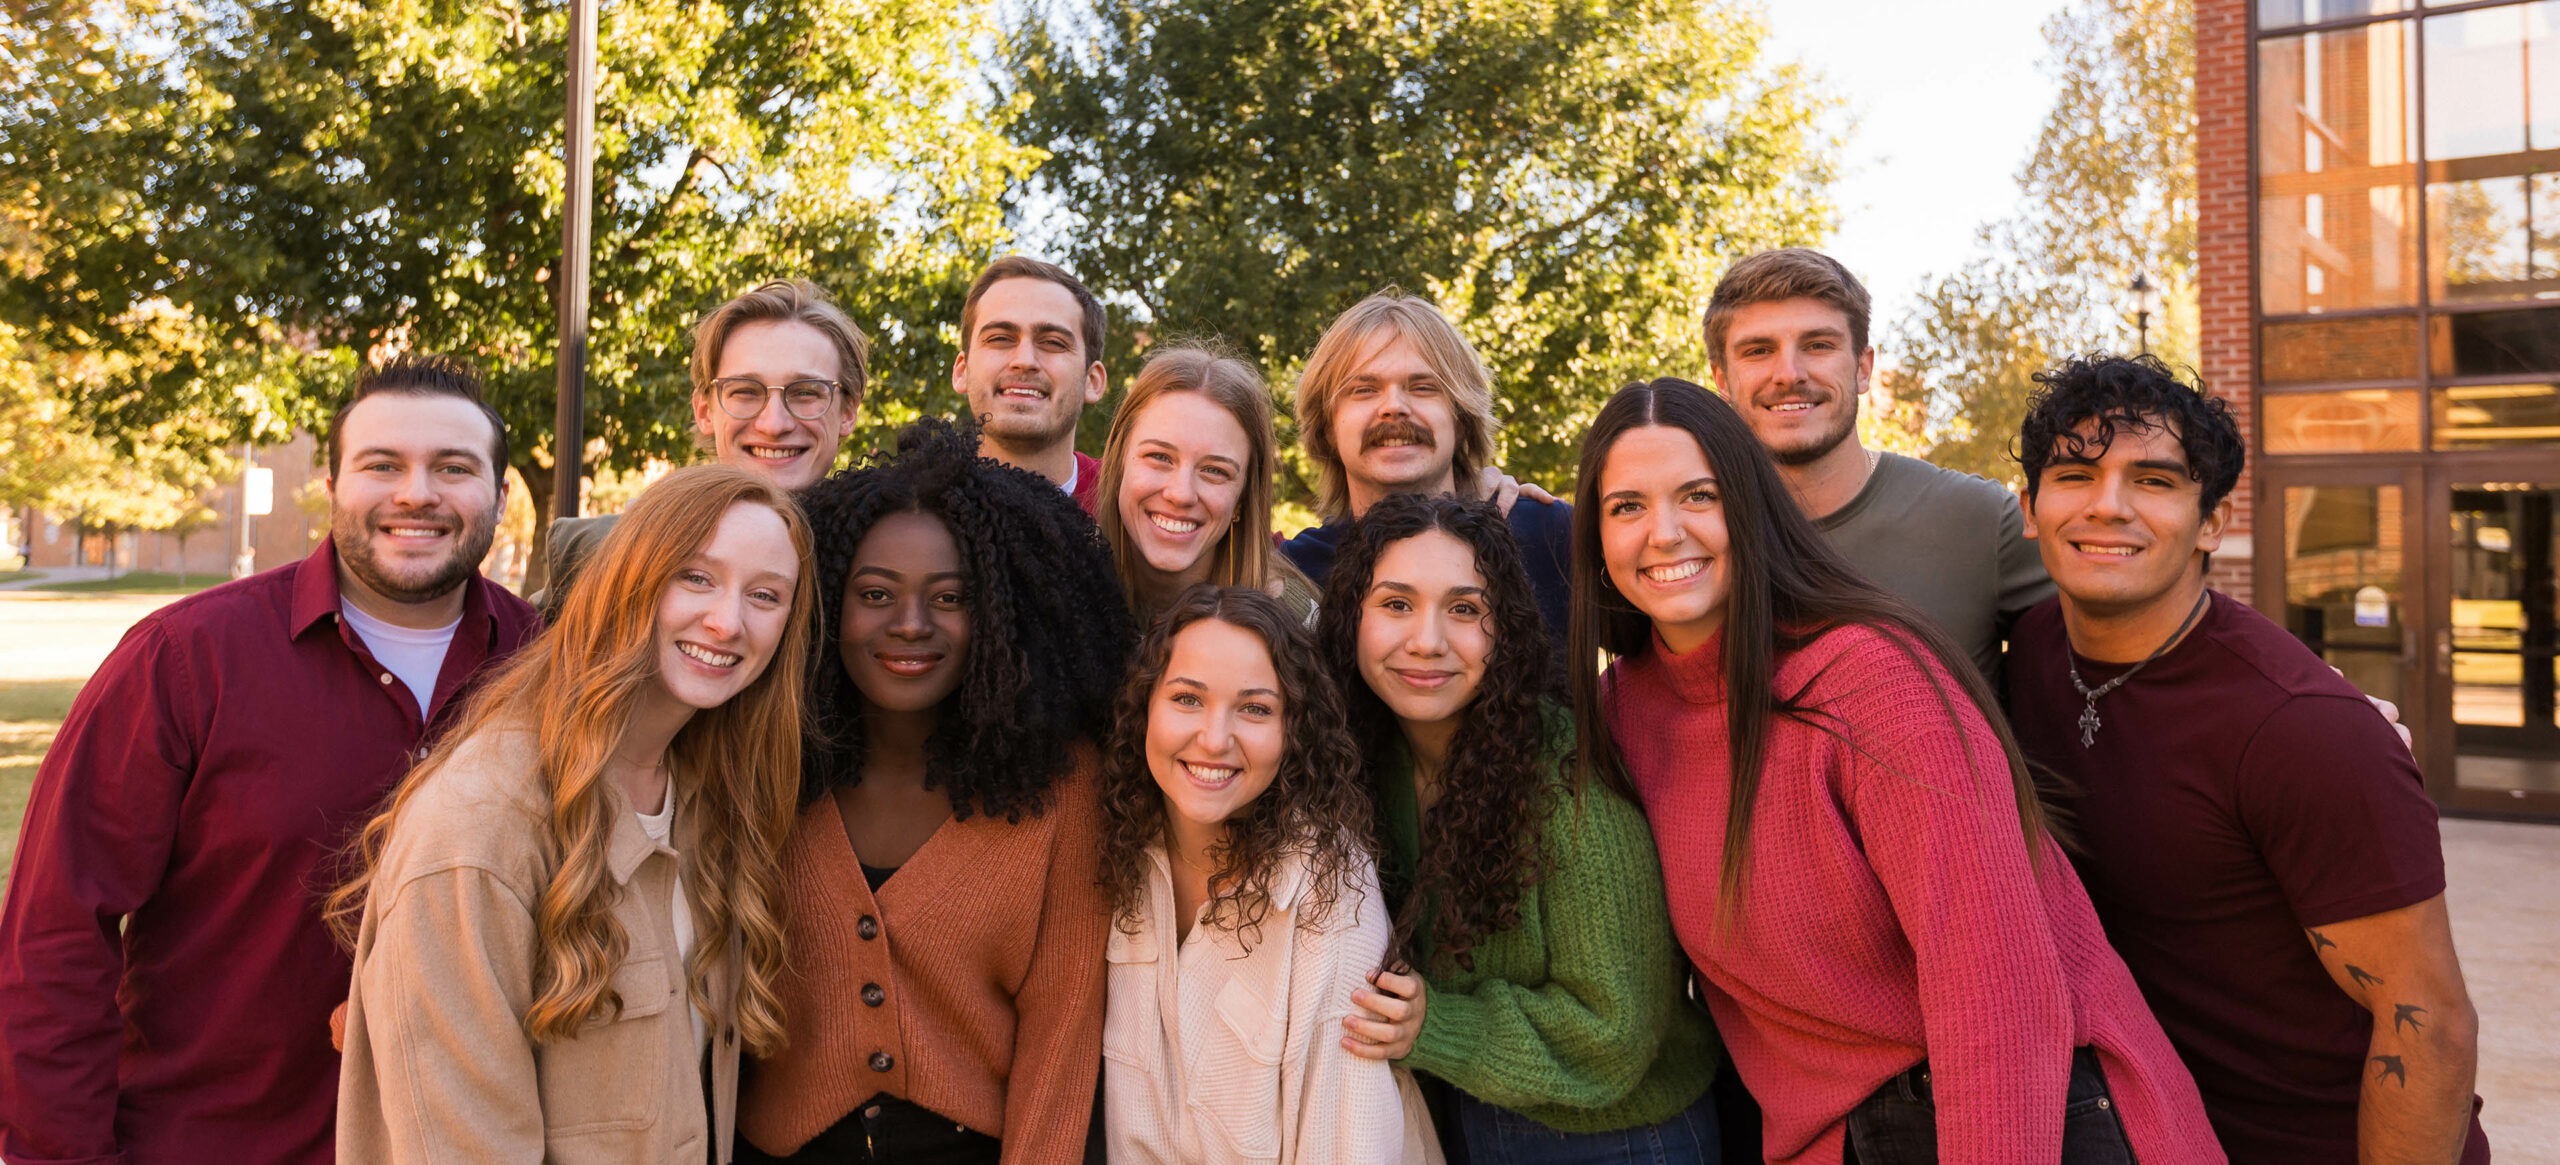 A diverse group of SNU students standing on the campus of SNU smiling, dressed in fall colors